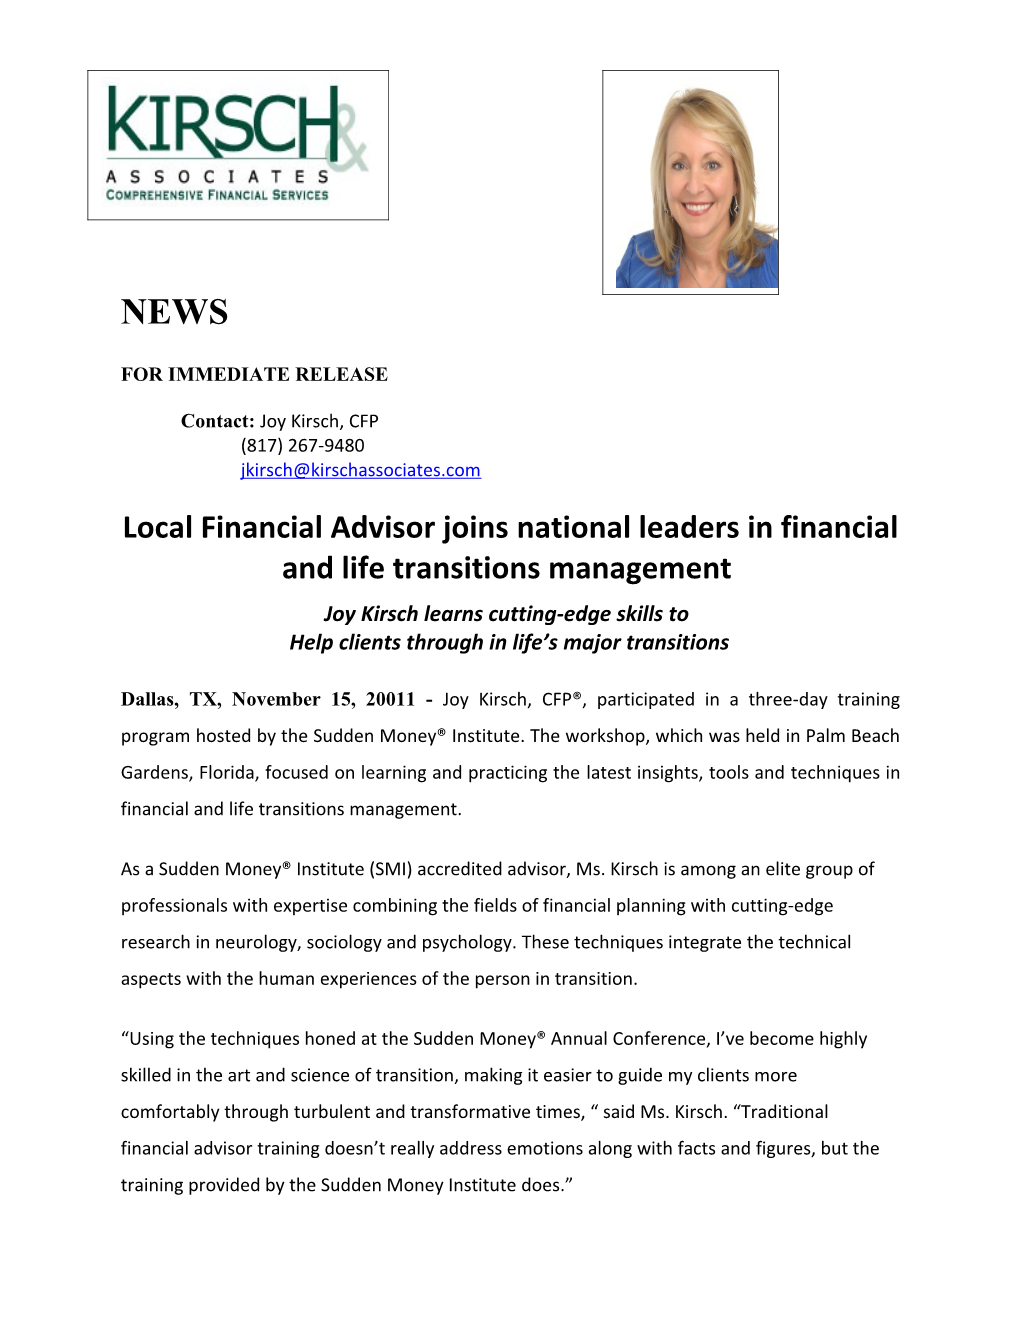 Local Financial Advisor Joinsnational Leaders in Financial and Life Transitions Management